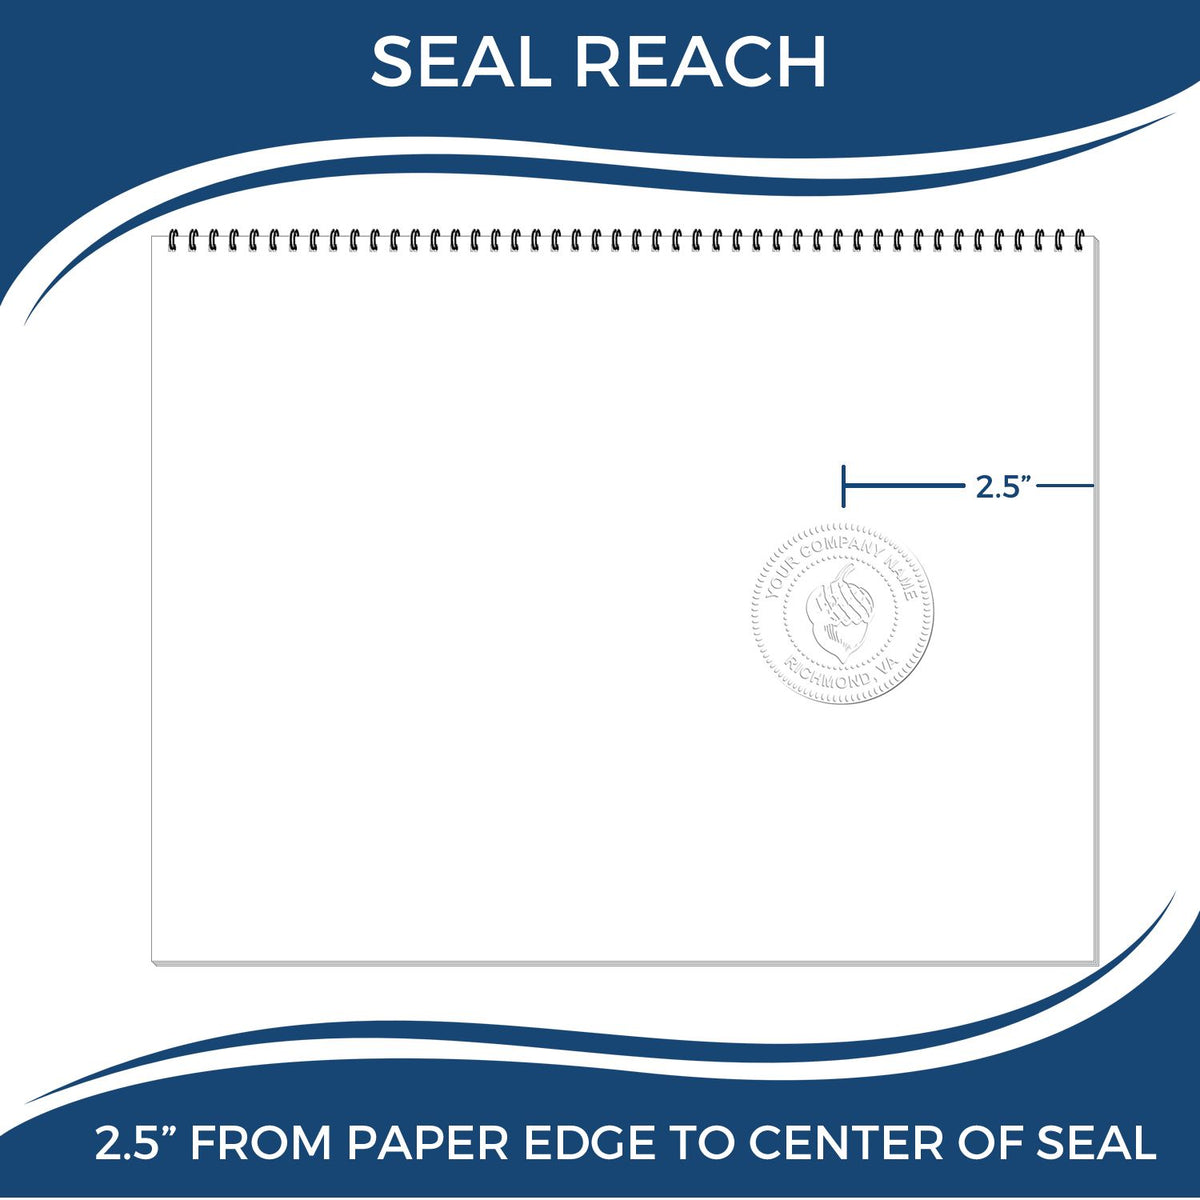 An infographic showing the seal reach which is represented by a ruler and a miniature seal image of the Heavy Duty Cast Iron California Engineer Seal Embosser